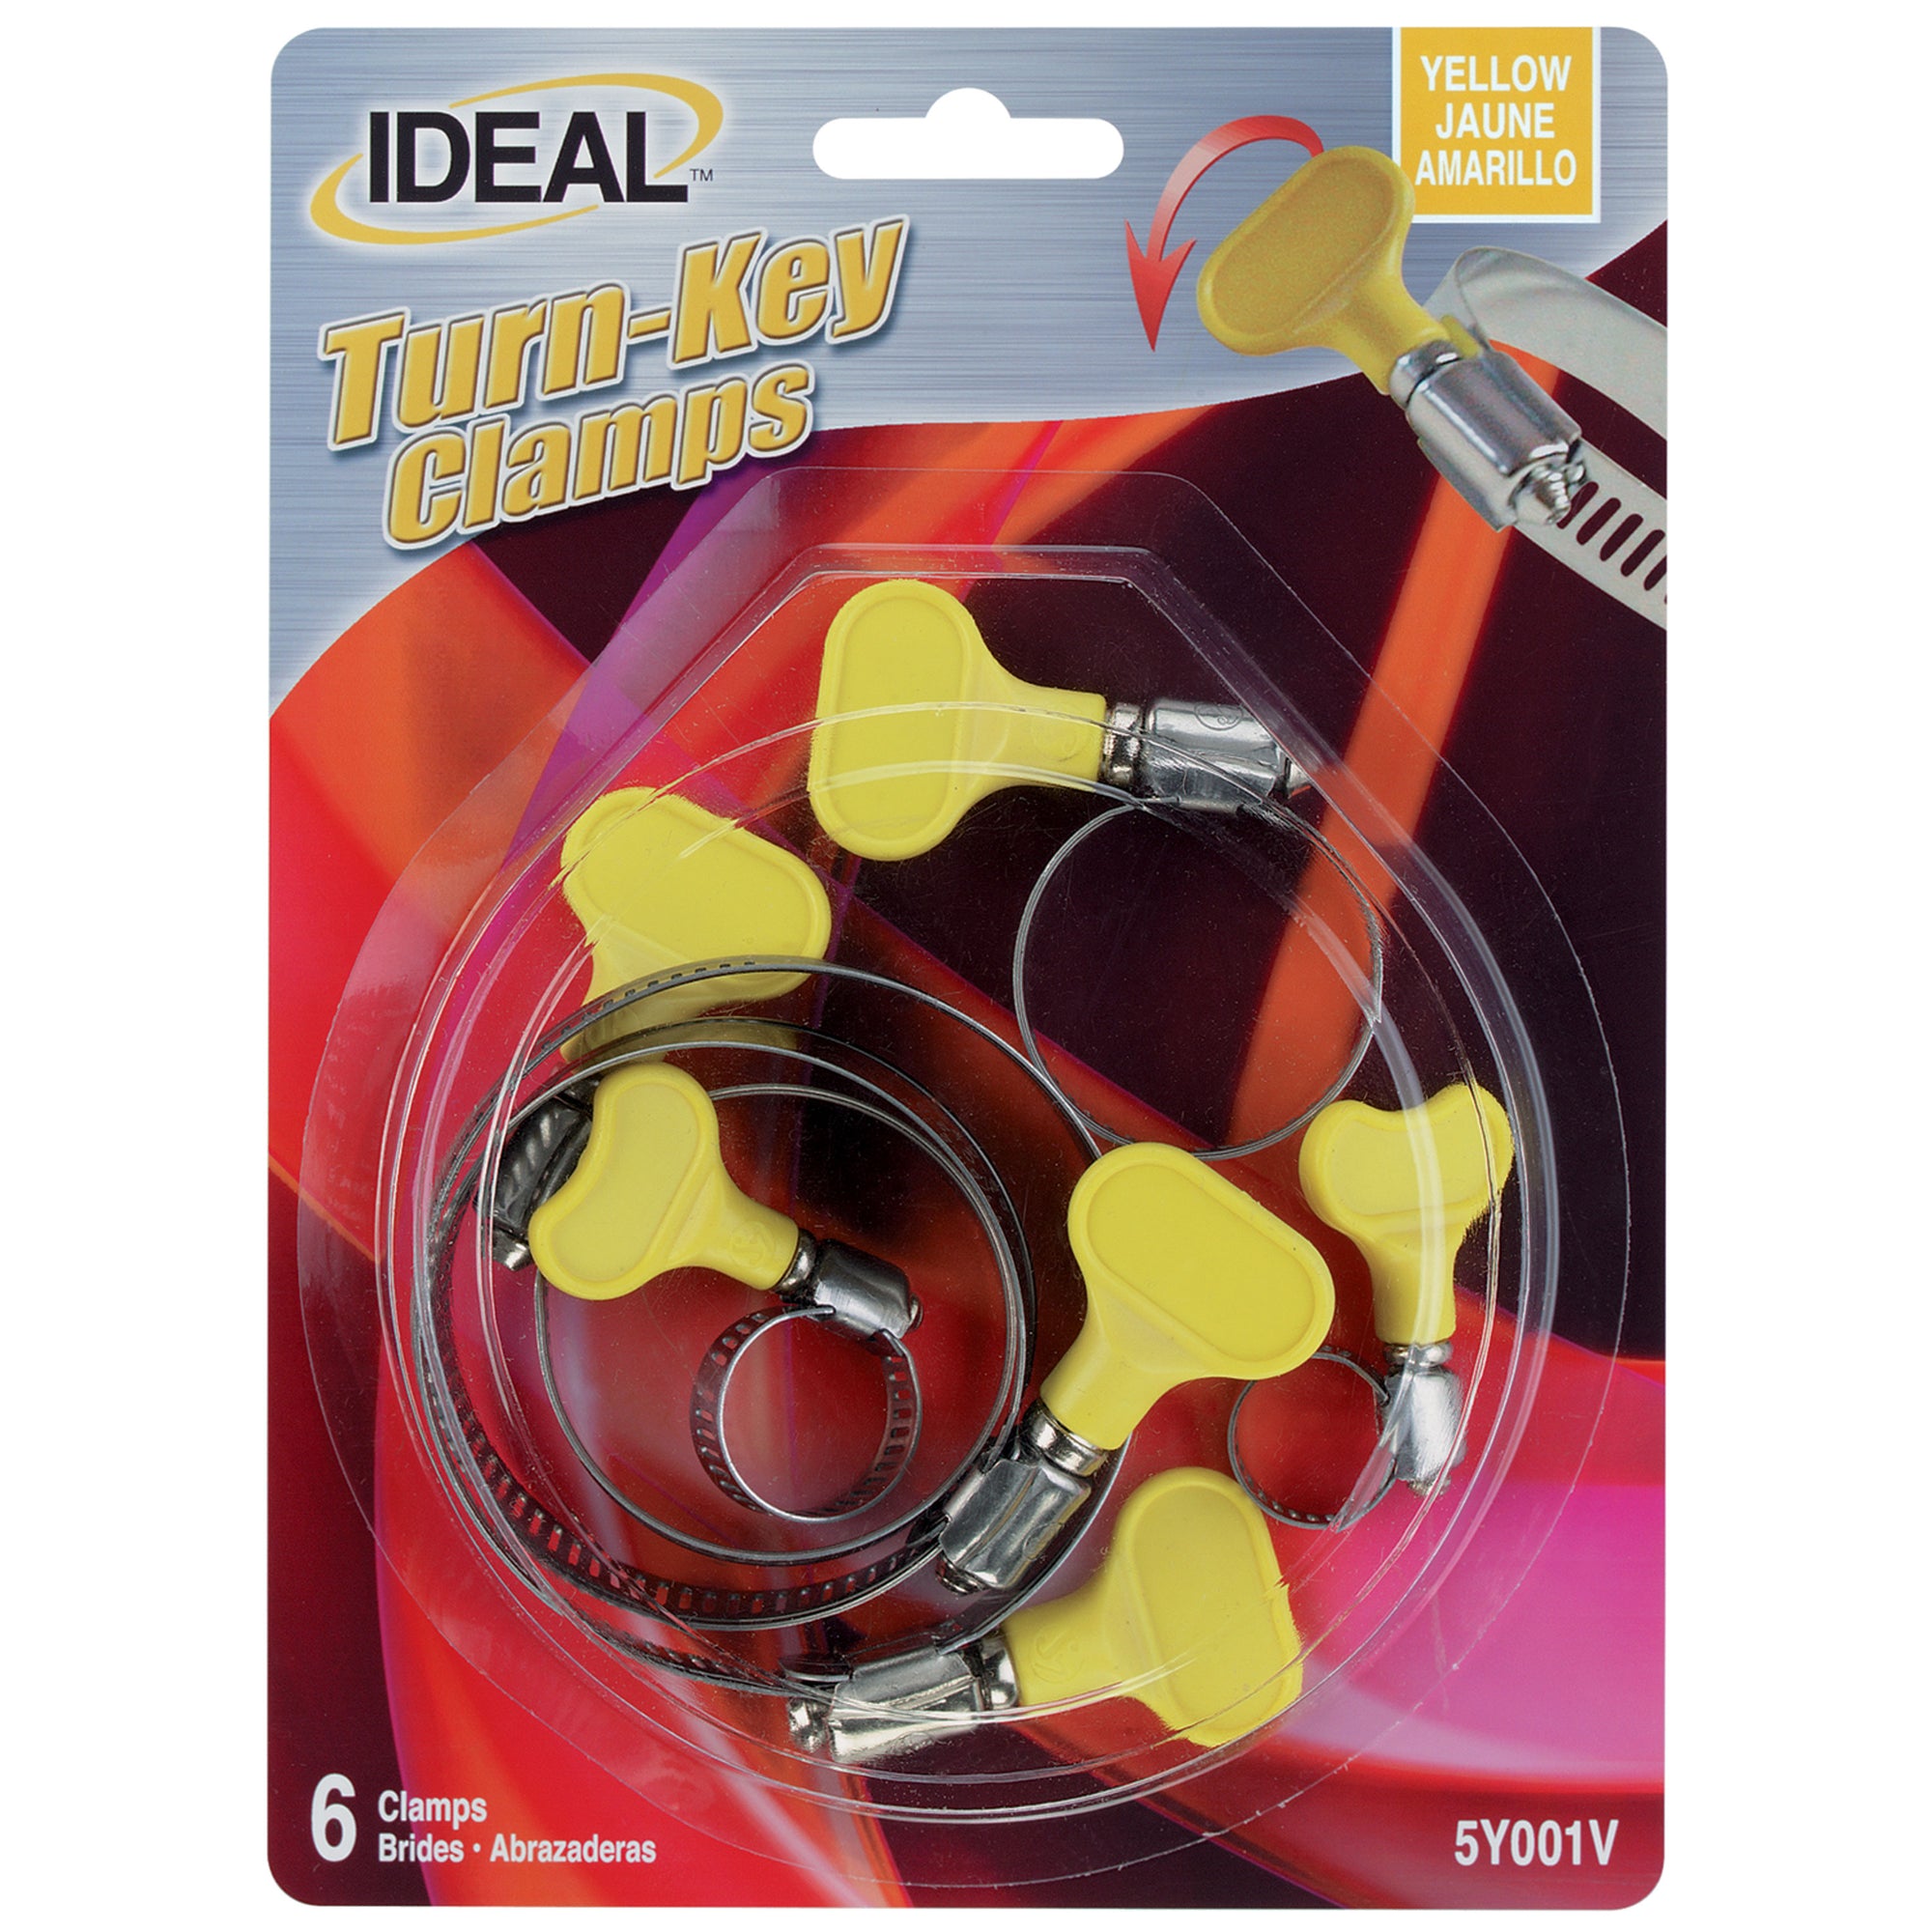 Ideal 5Y00158 Turn-Key Clamps - Pack of 6, Assorted Sizes